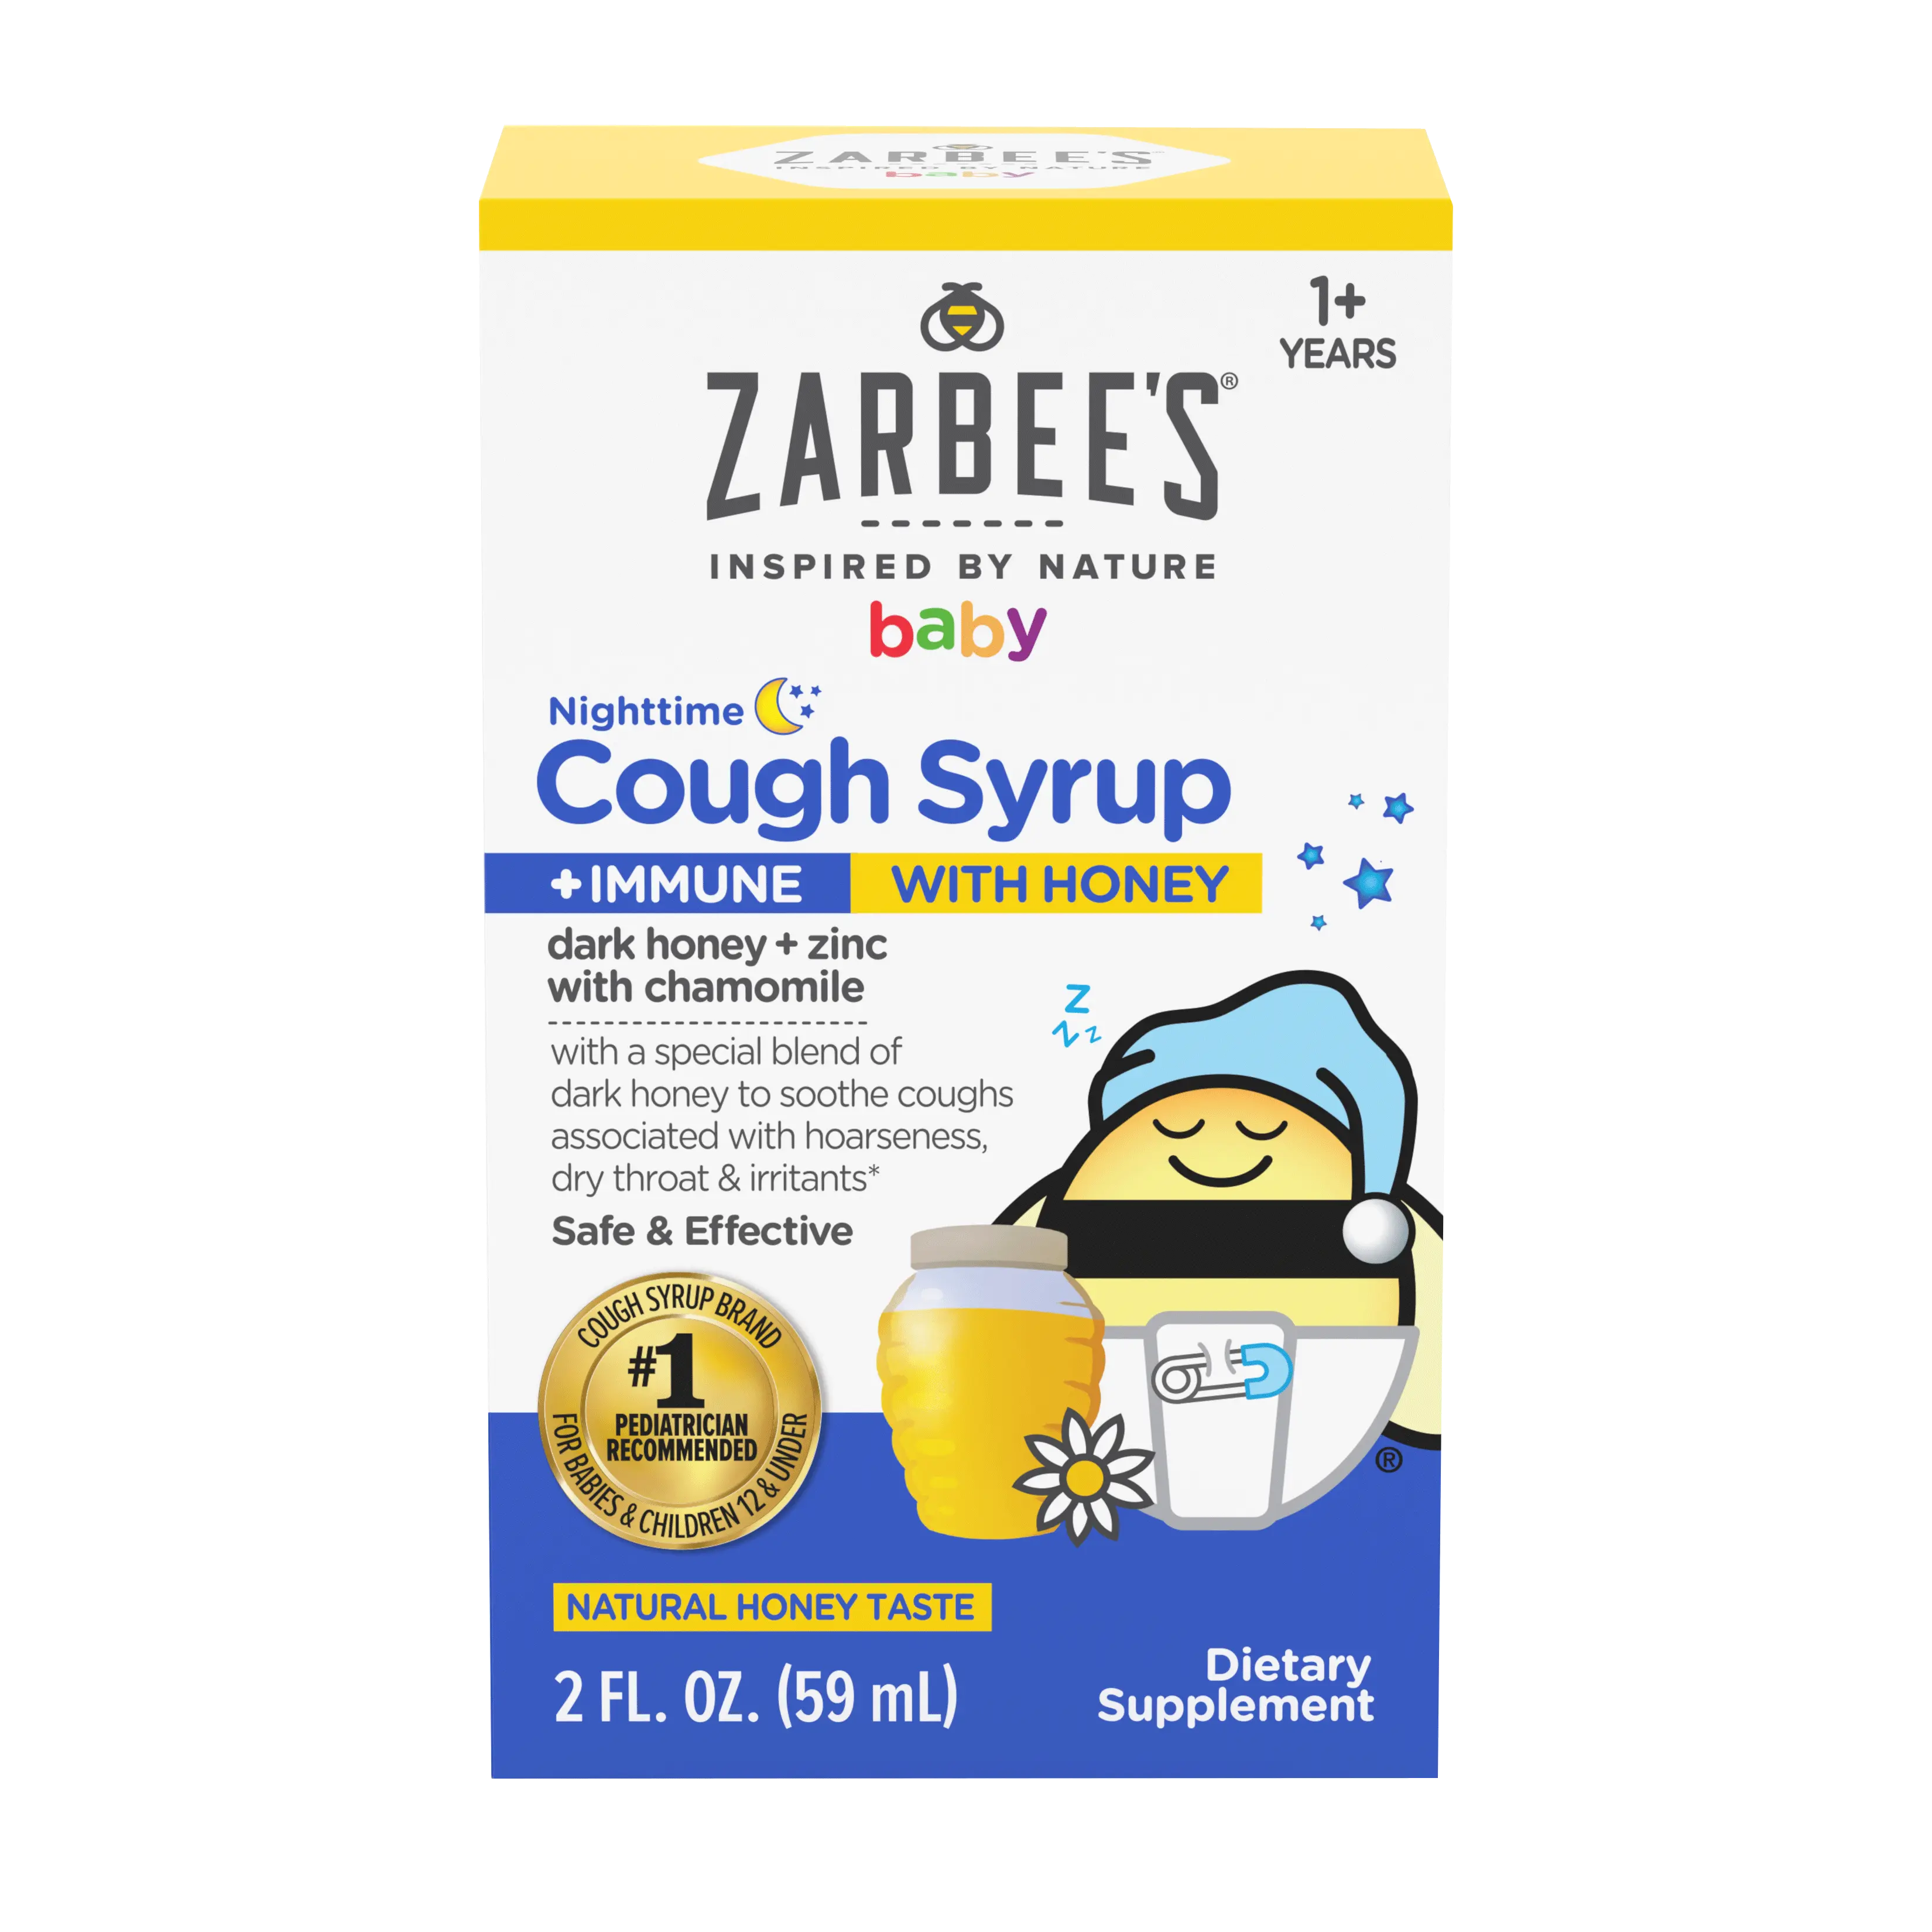 A rendering of the packaging for Zarbee's Baby Nighttime Cough Syrup + Immune with Honey